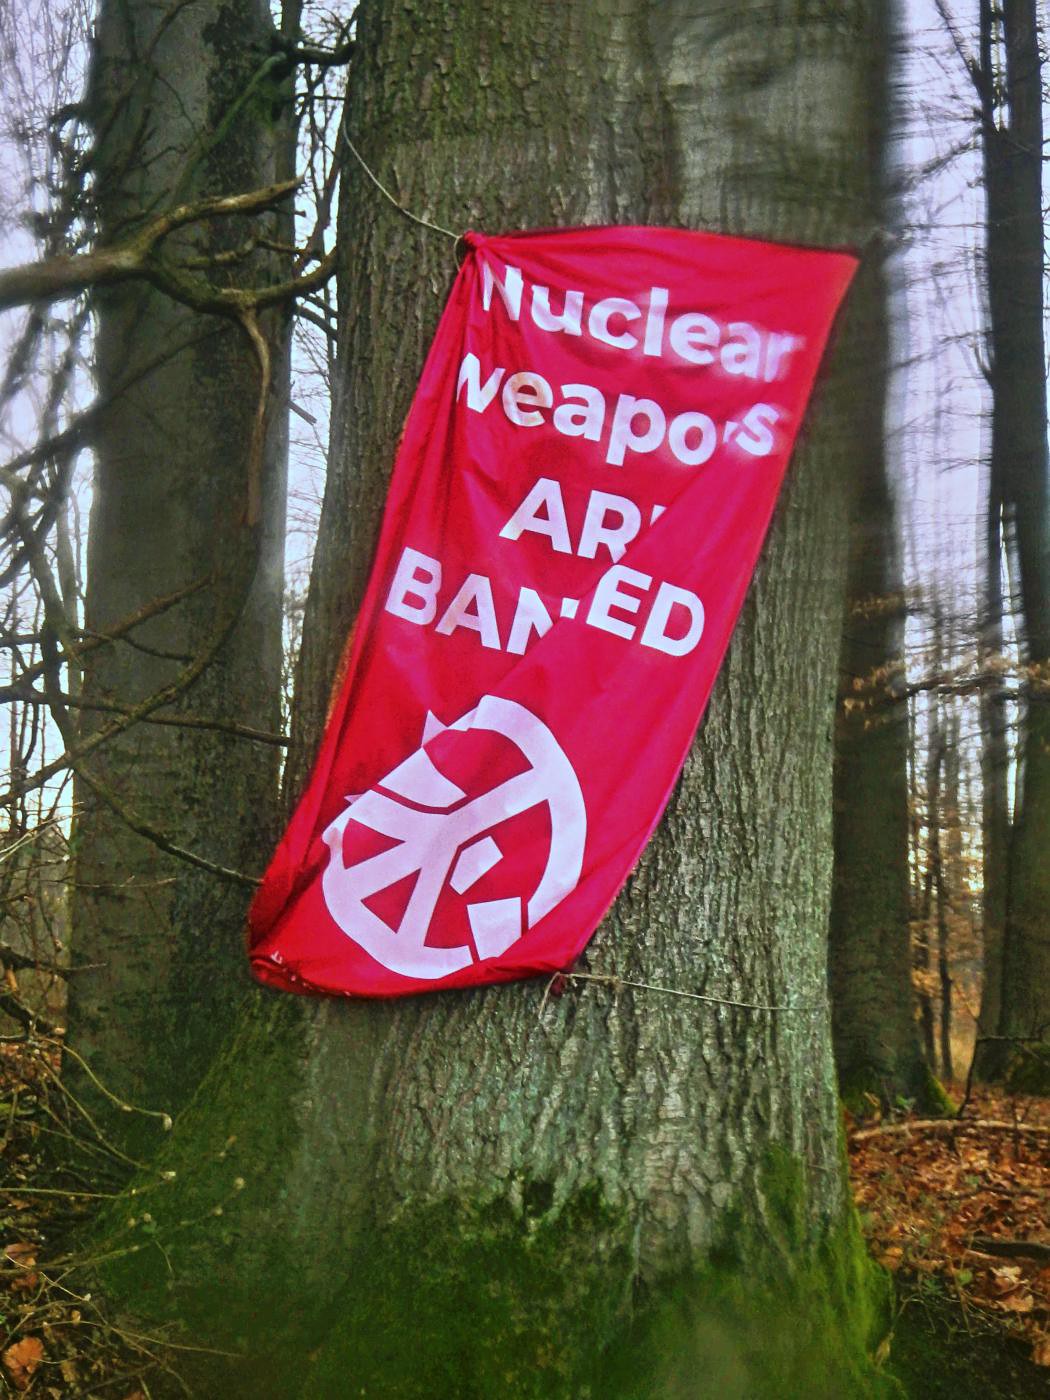 Nuclear weapons are banned